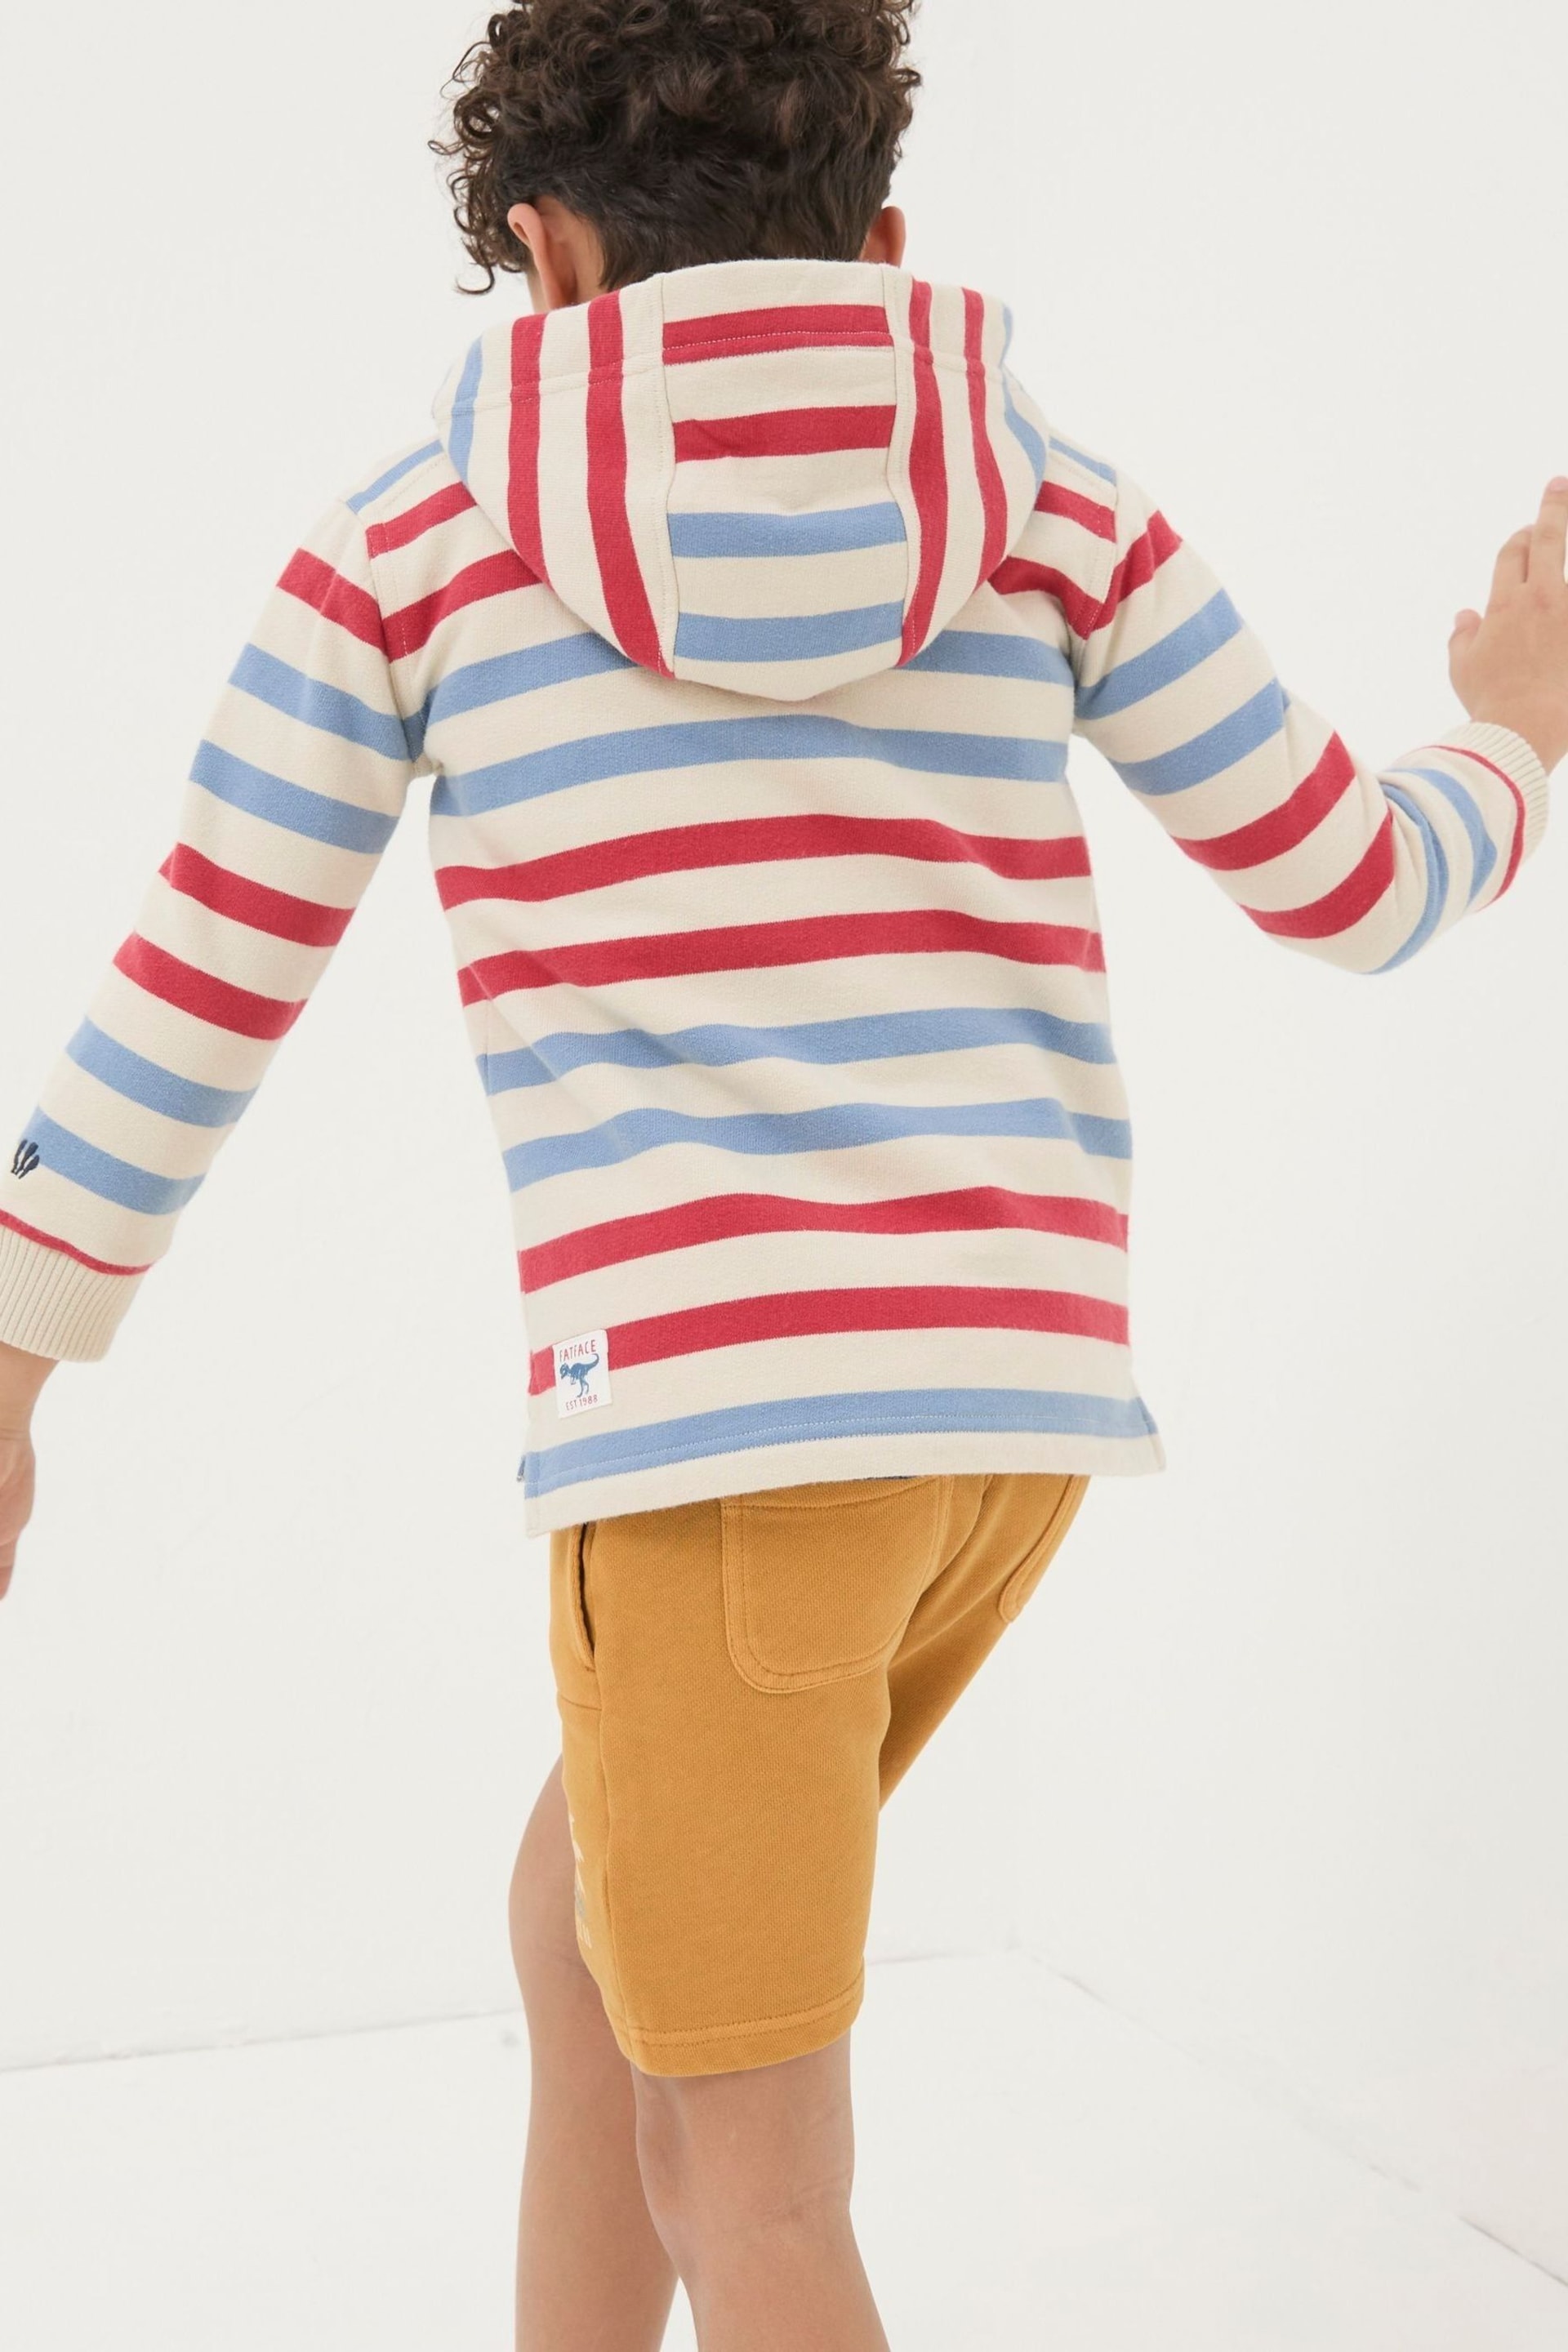 FatFace Natural Stripe Half Neck Hoodie - Image 2 of 5